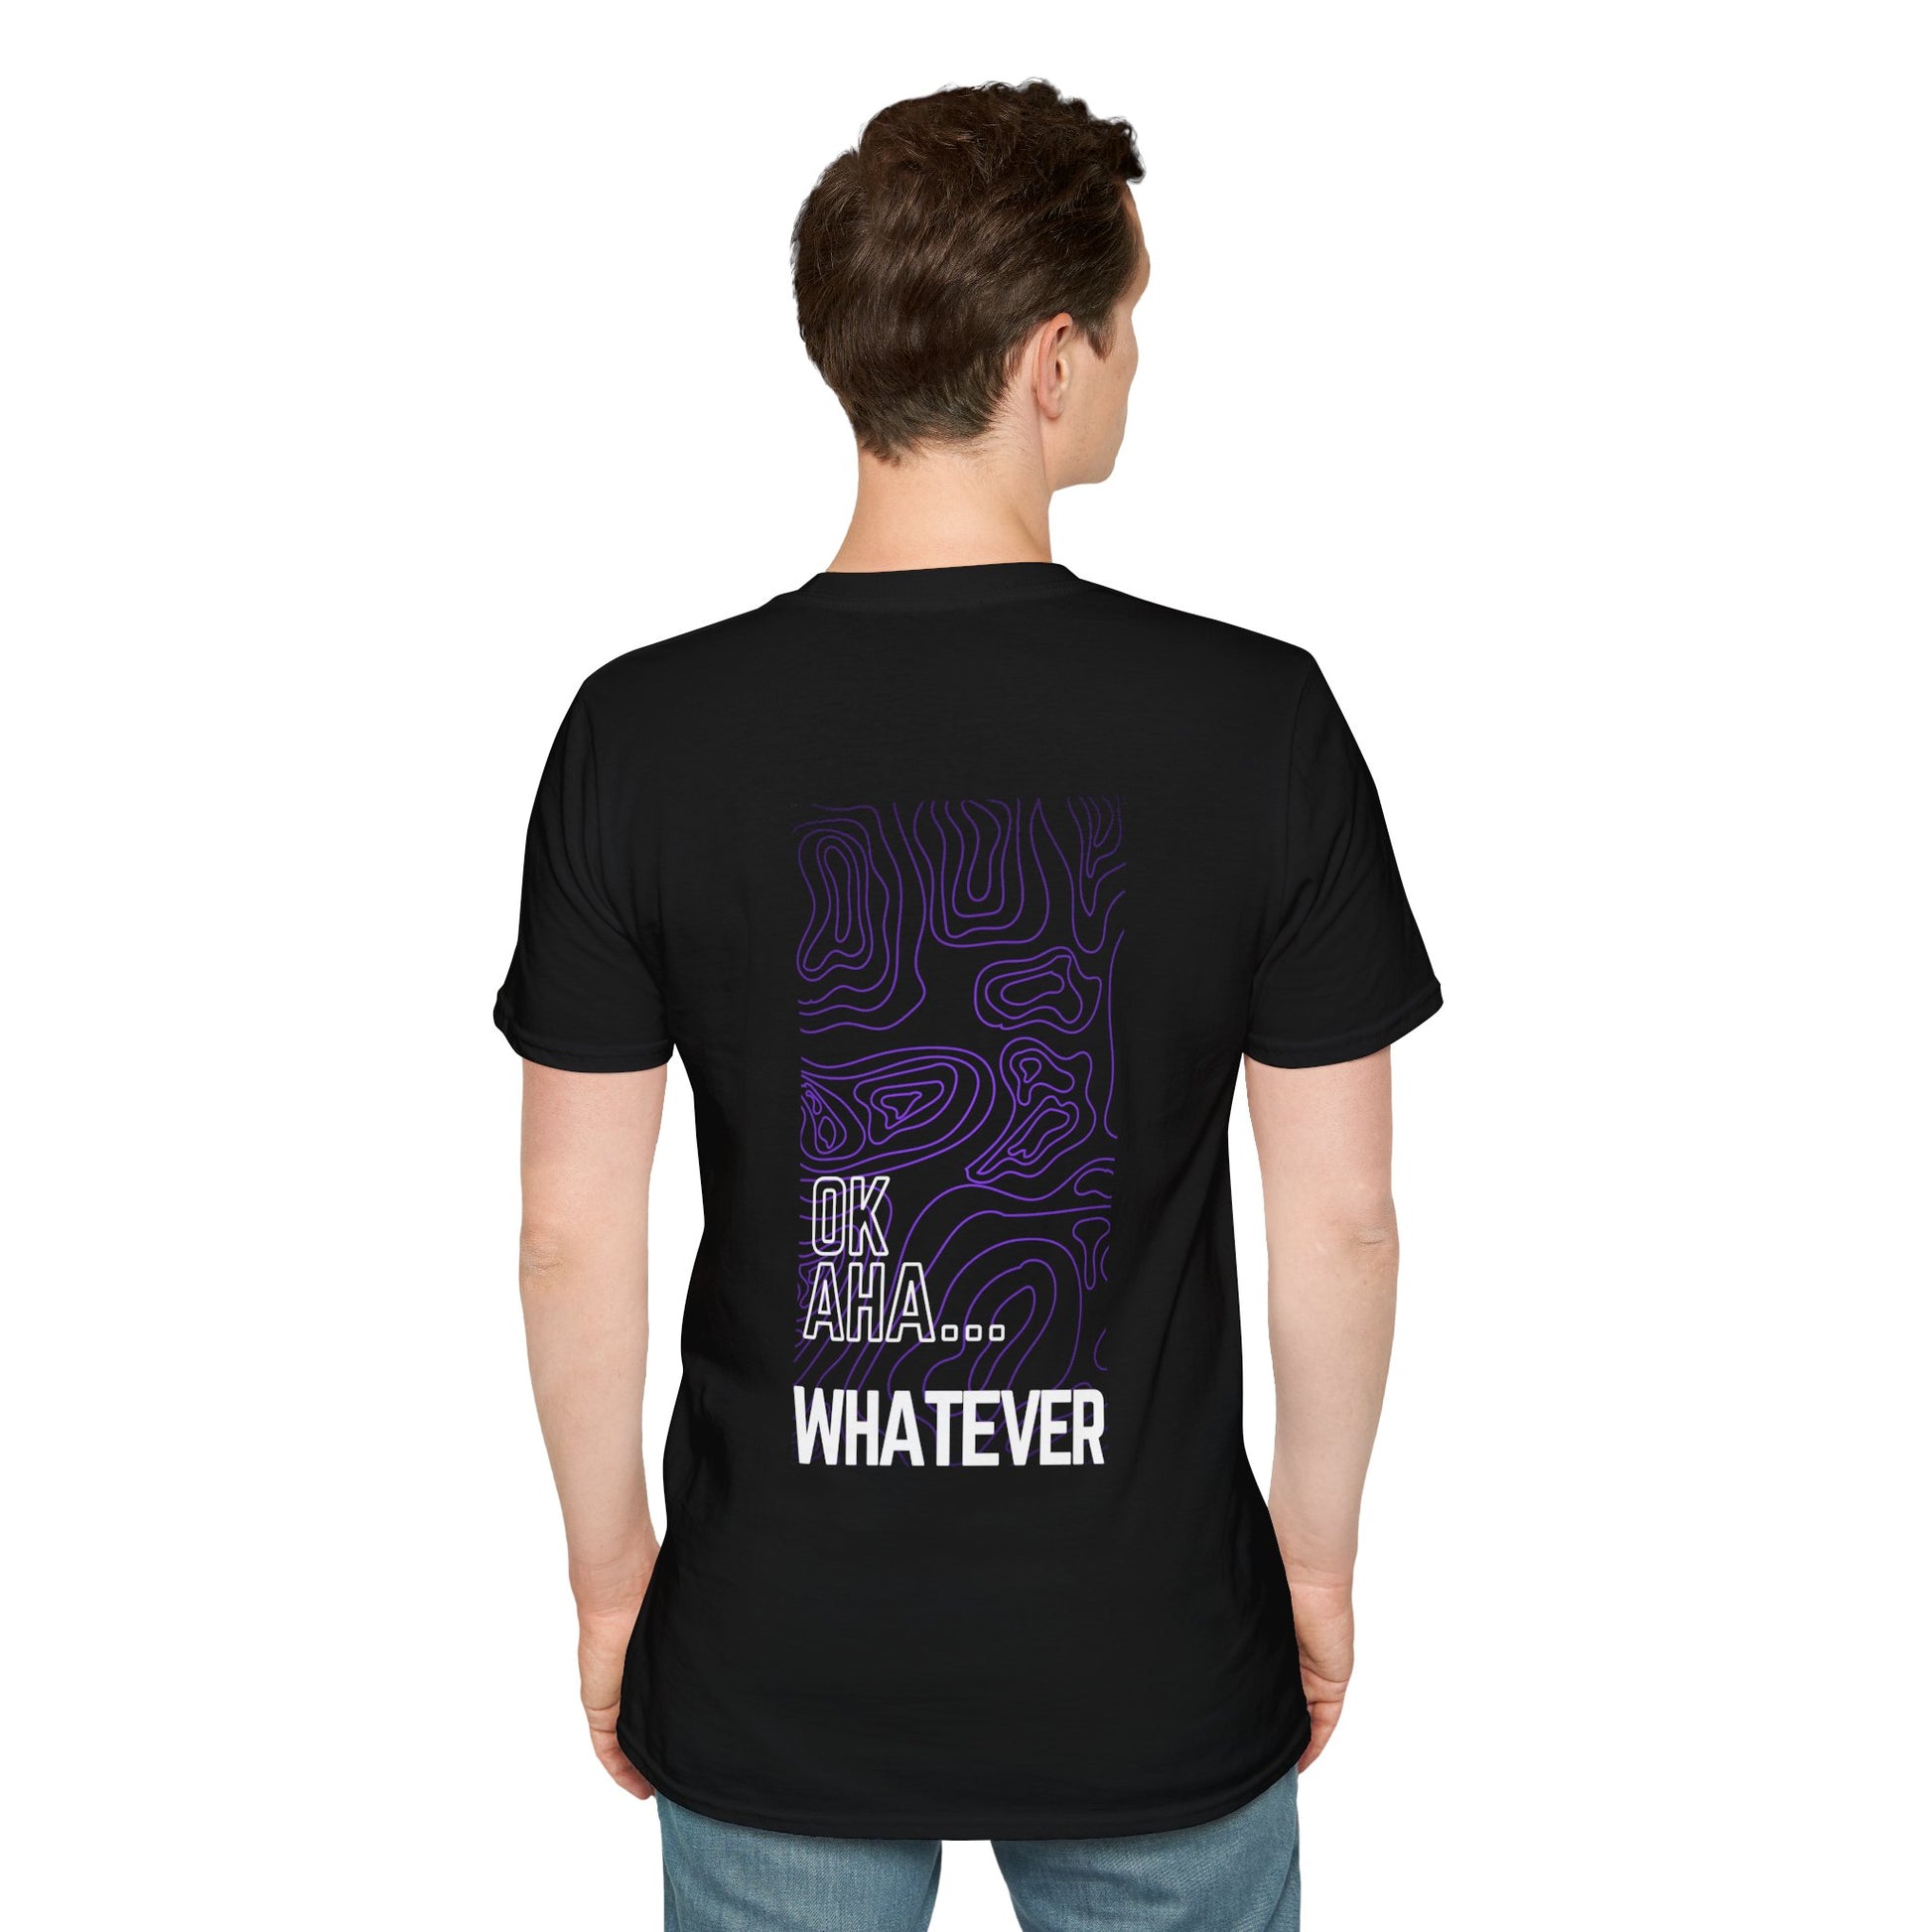 Black T-shirt with a purple abstract pattern and the text ‘OK AHA... WHATEVER’ in large white letters